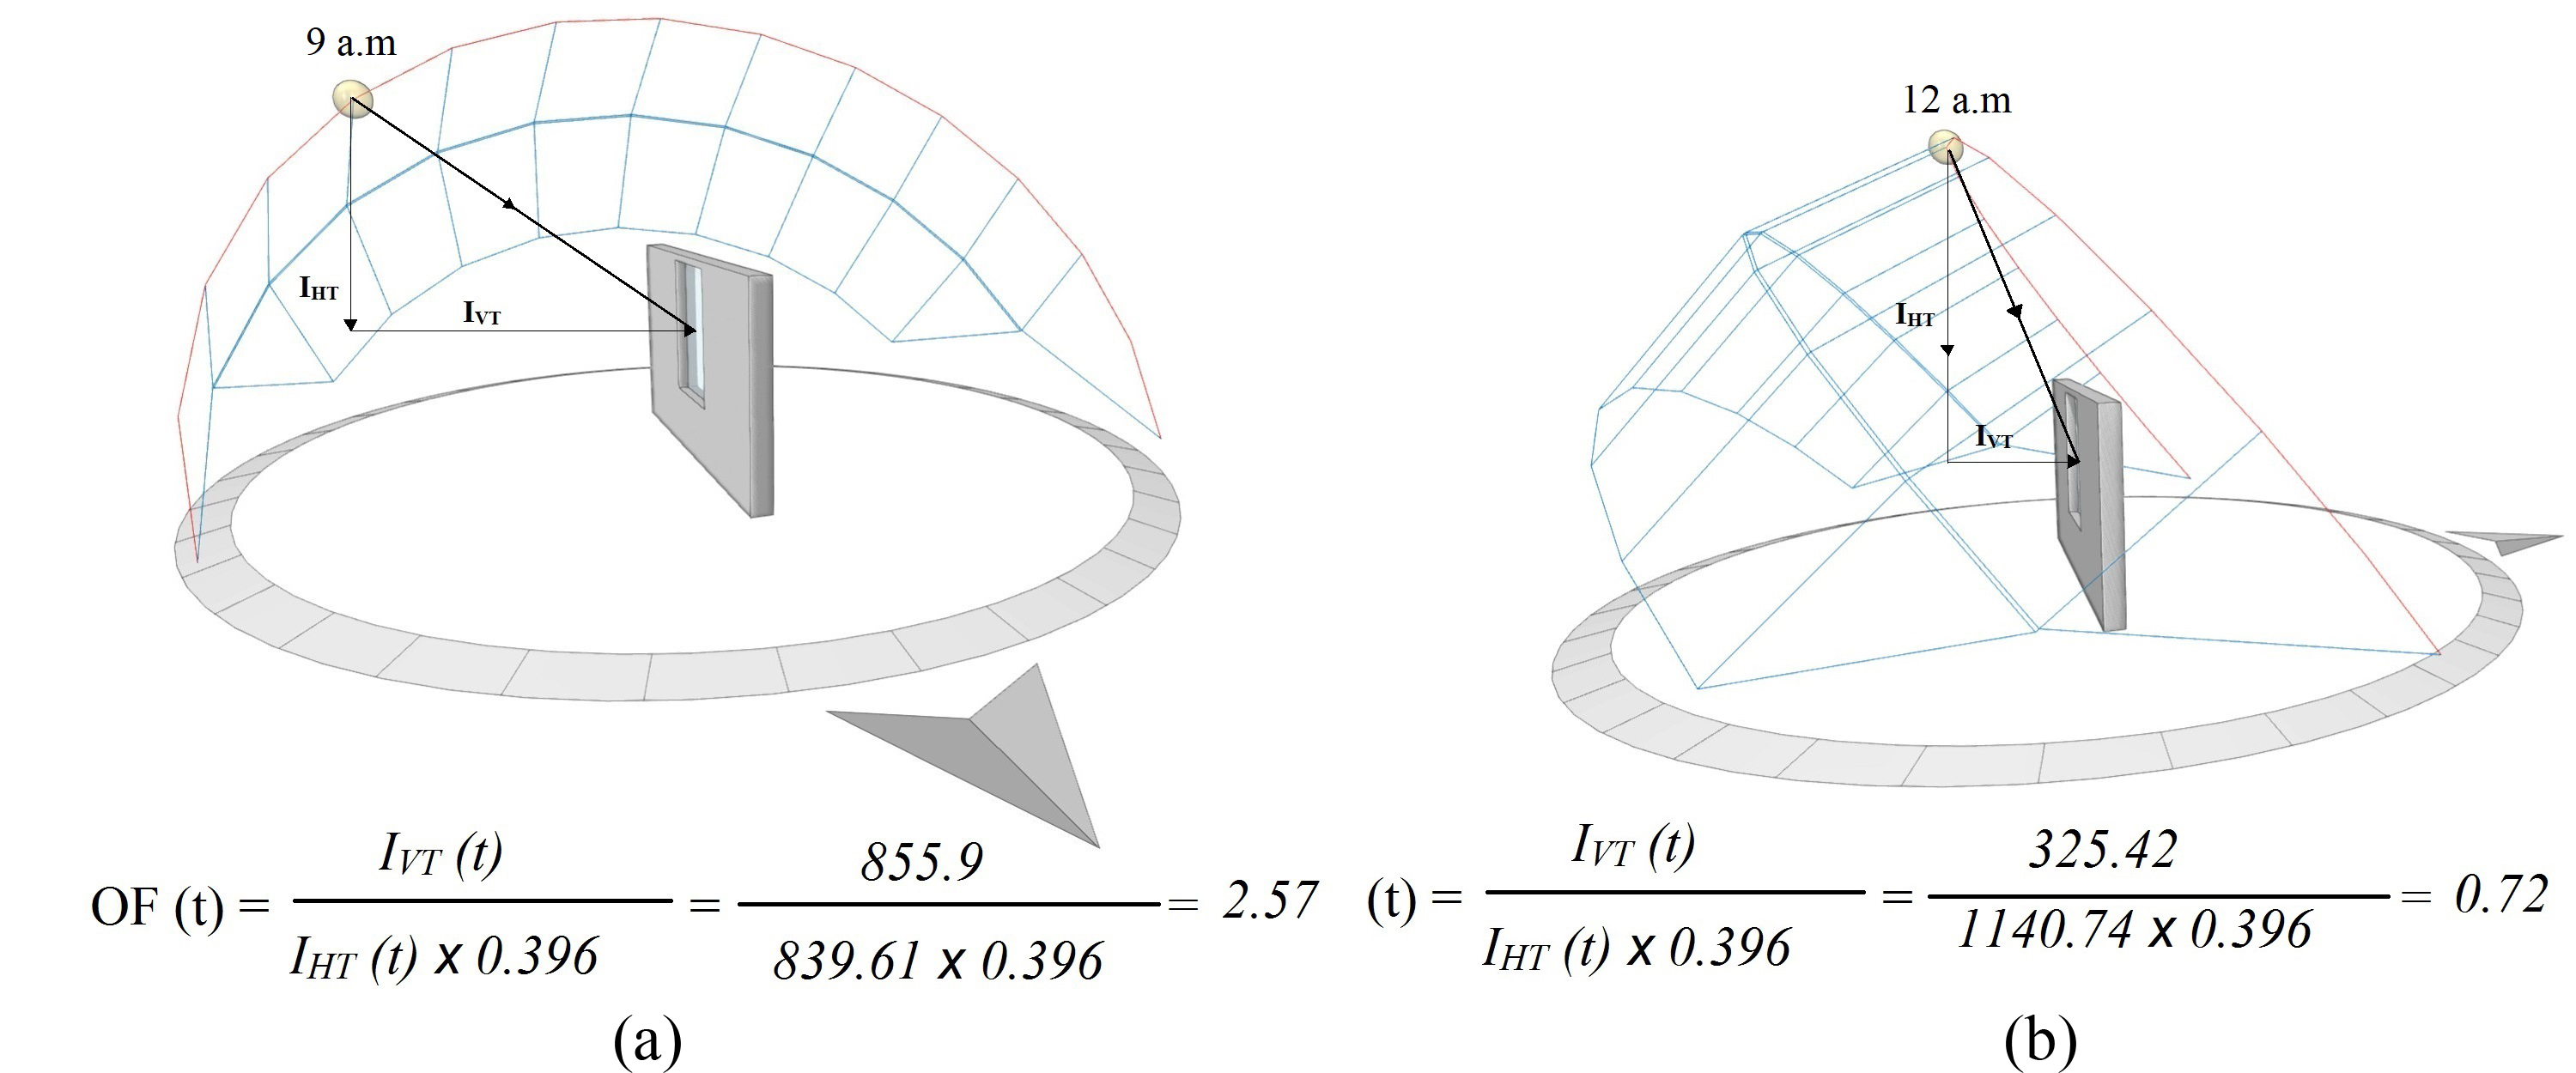 Impact of solar position on orientation factor (OF) for (a) East direction and (b) South direction.